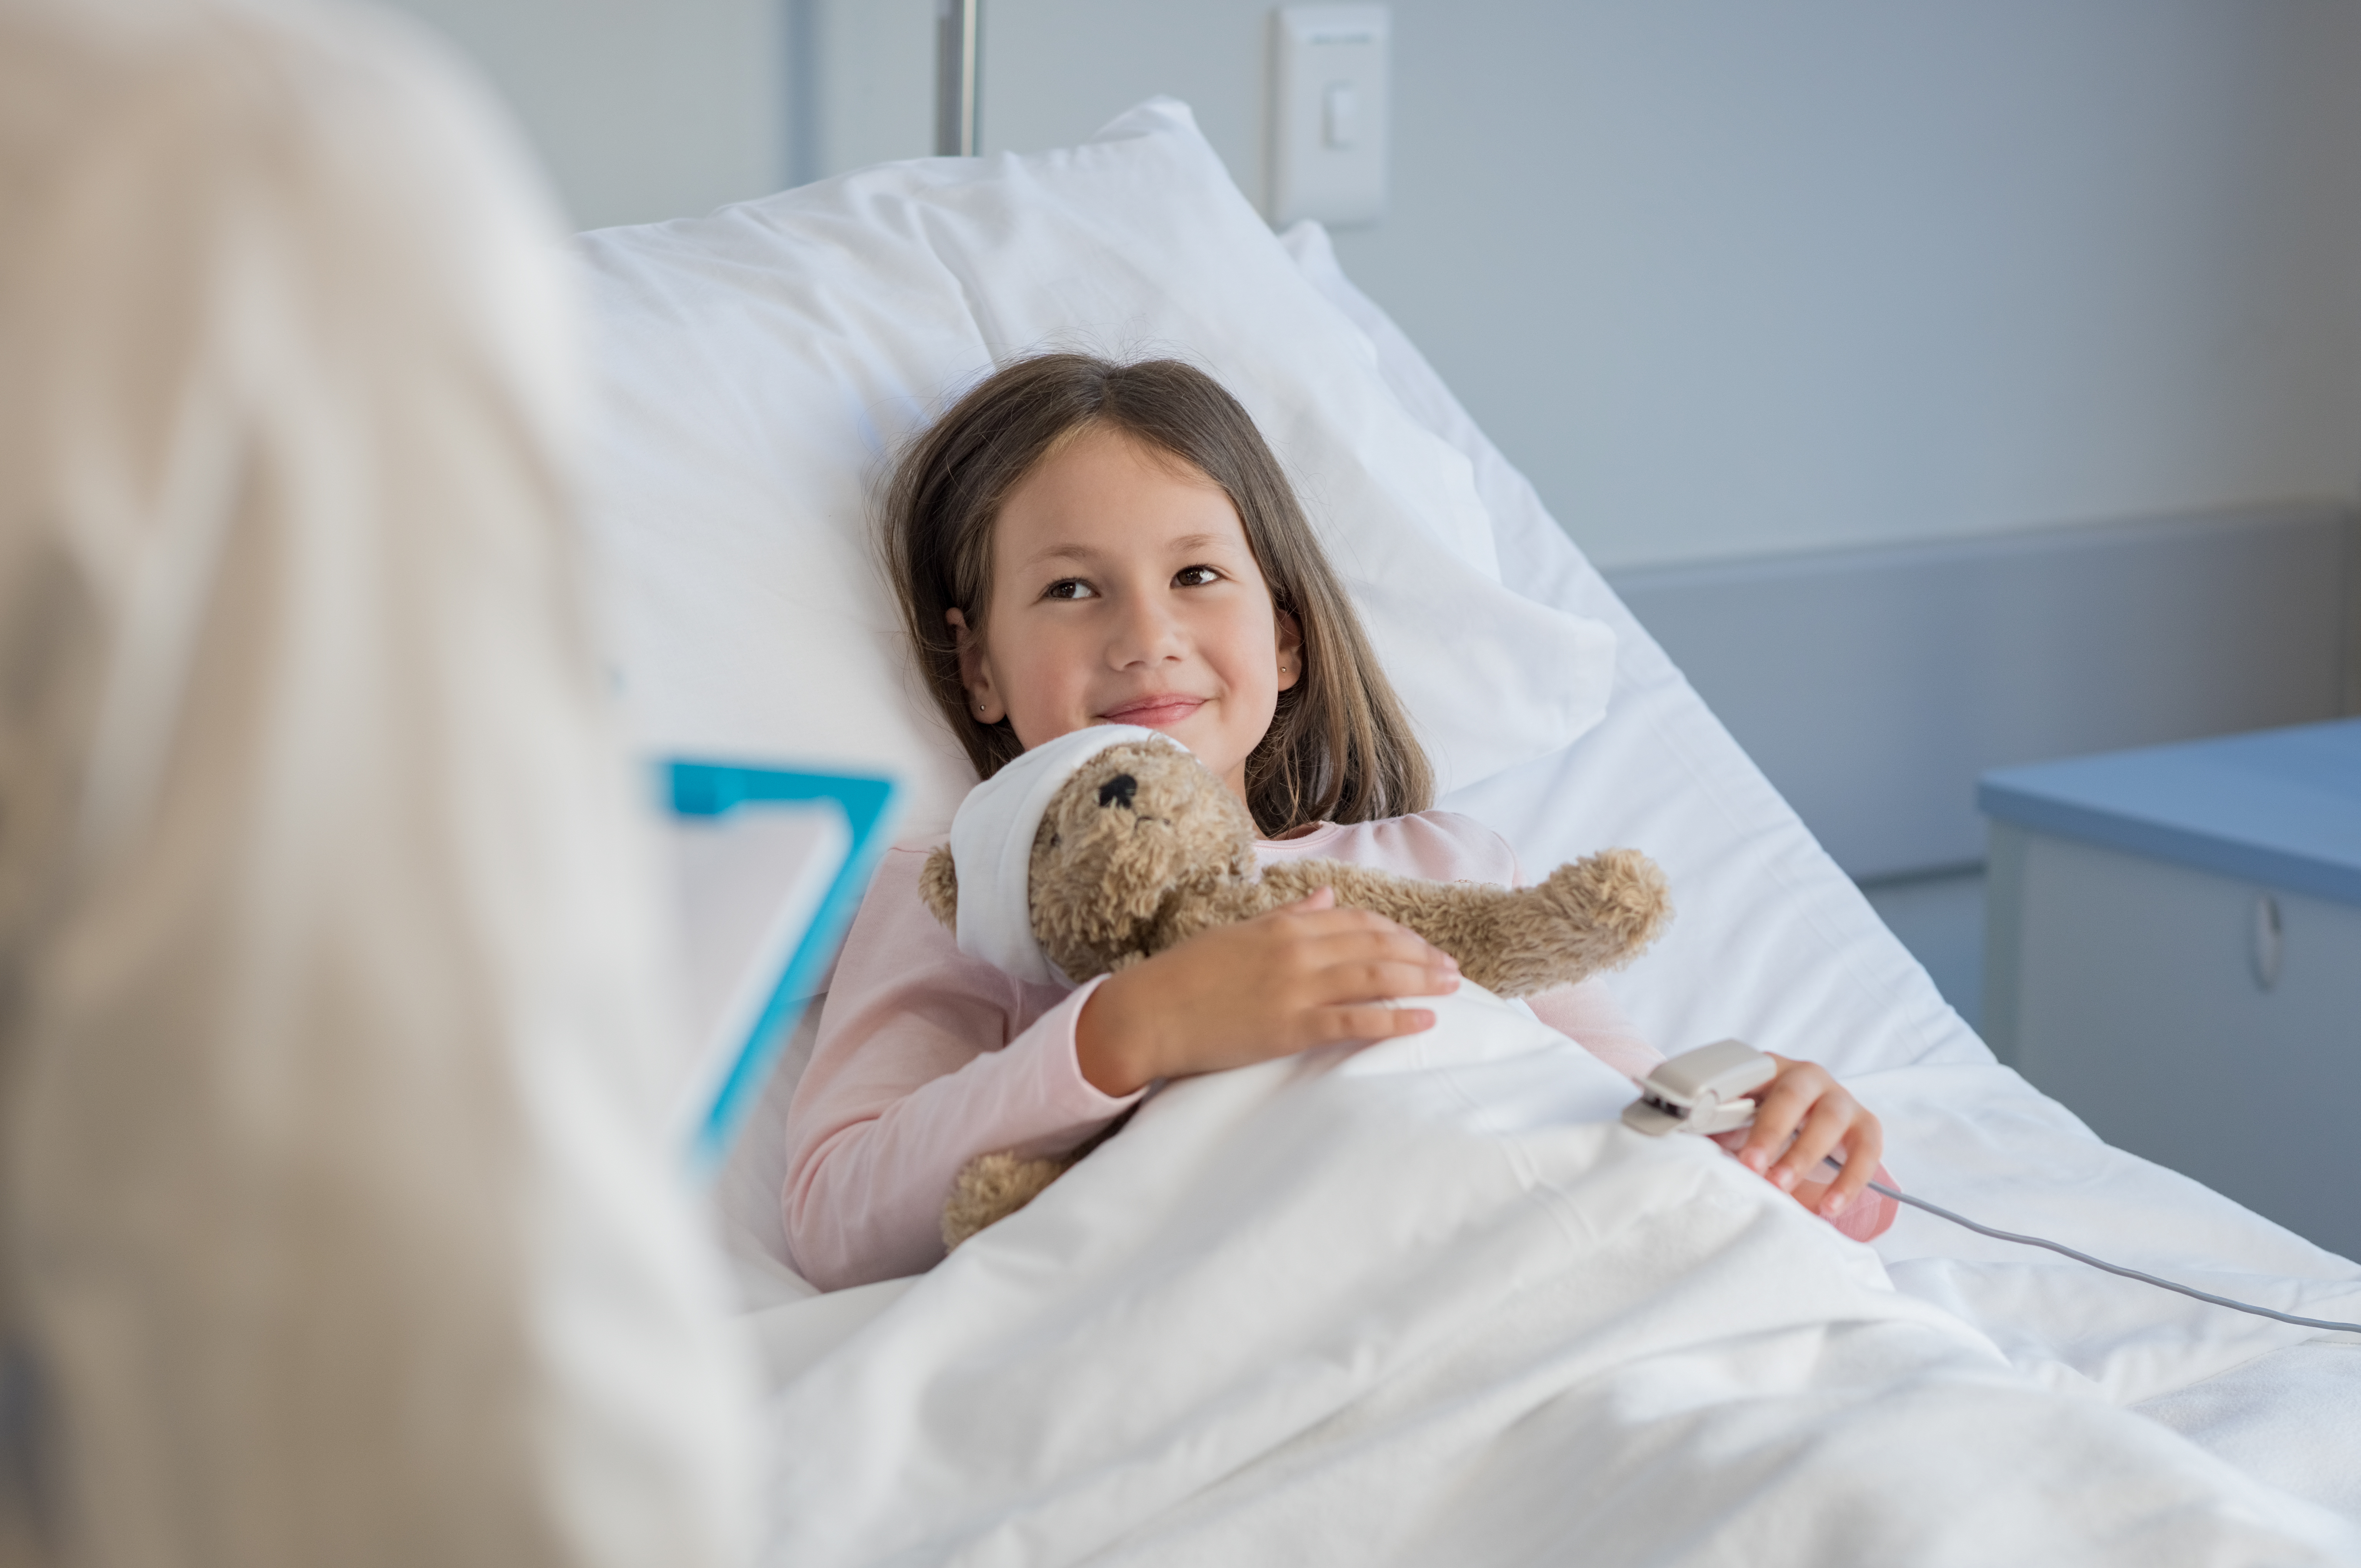 Smiling little girl with oxygen saturated probe resting on hospital bed. Girl patient looking at doctor with a smile. Child and doctor at medical clinic | Source: Shutterstock